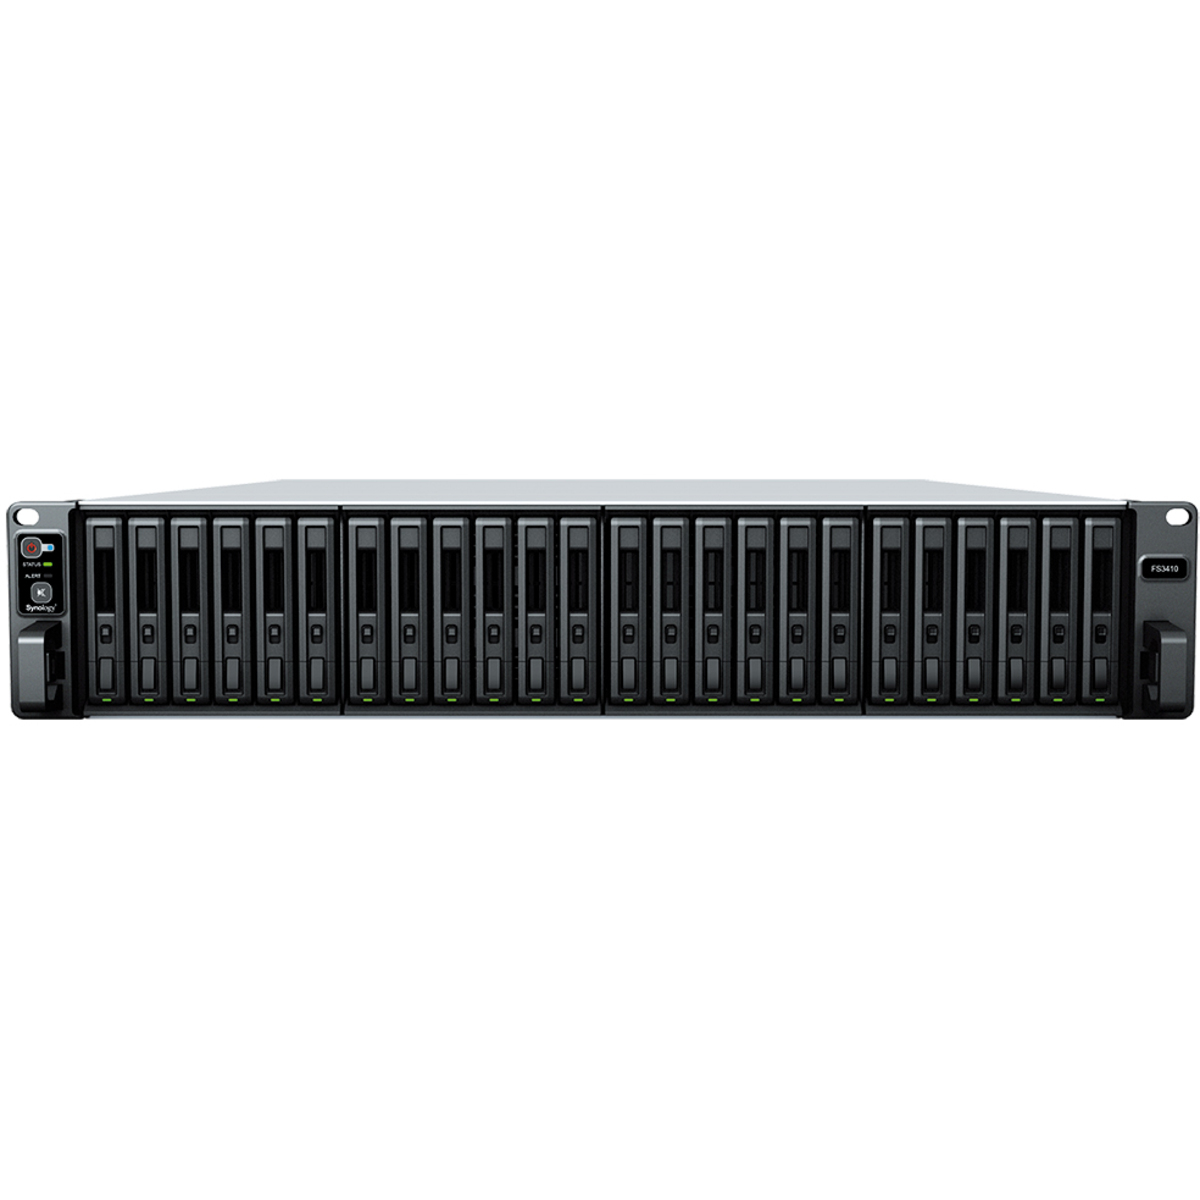 Synology FlashStation FS3410 9tb 24-Bay RackMount Large Business / Enterprise NAS - Network Attached Storage Device 18x500gb Sandisk Ultra 3D SDSSDH3-500G 2.5 560/520MB/s SATA 6Gb/s SSD CONSUMER Class Drives Installed - Burn-In Tested FlashStation FS3410